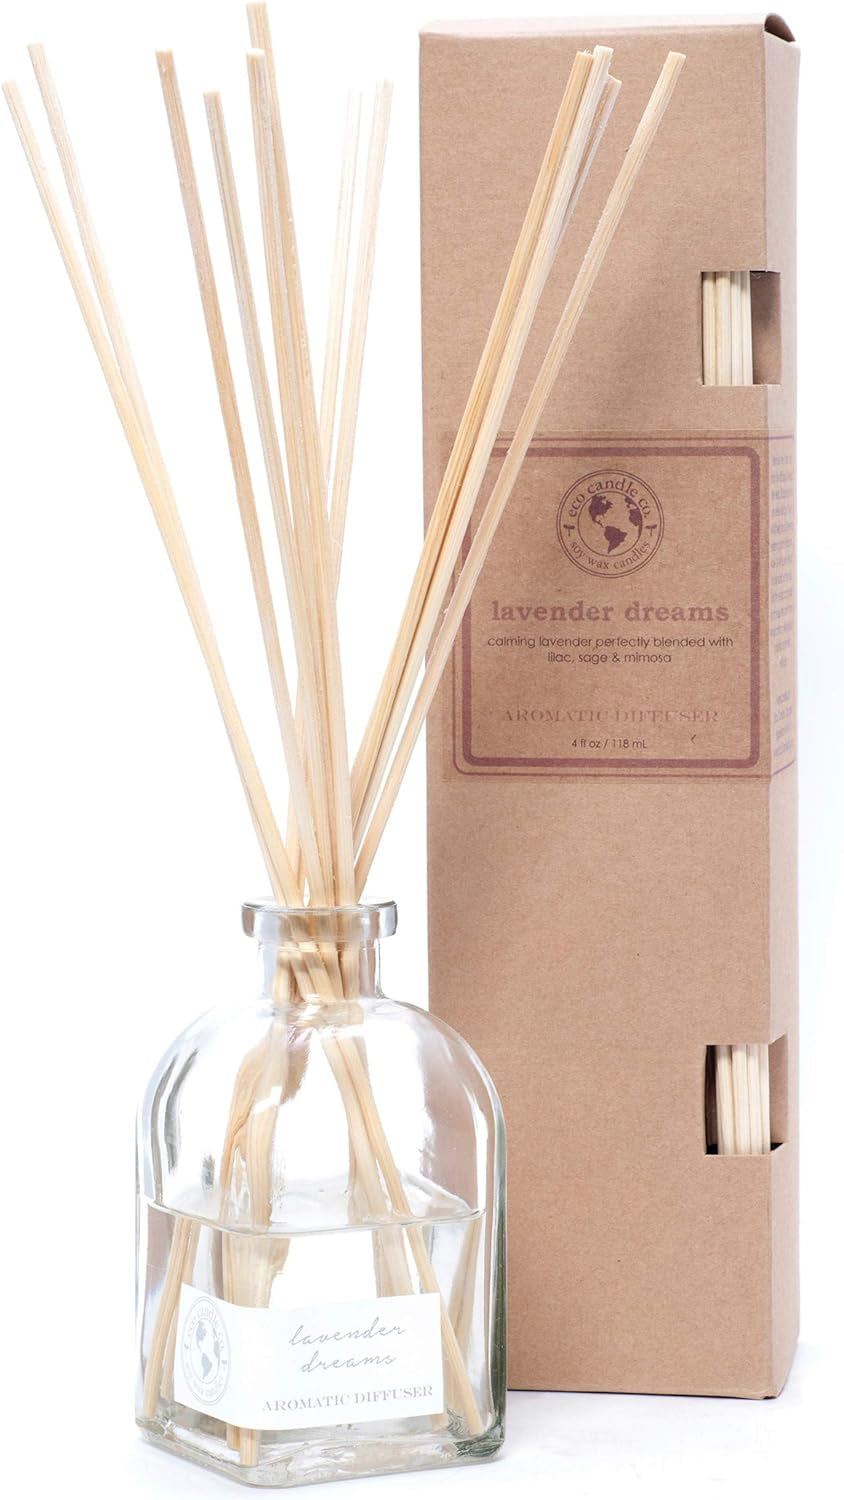 Reed Diffuser Set, Lavender Dreams, 4 Oz. - Scents of Lavender, Lilac, Sage, & Mimosa - Premium Fragrance and Essential Oil Blends, Clear Glass, 12 Reed Sticks, Recycled Kraft Box